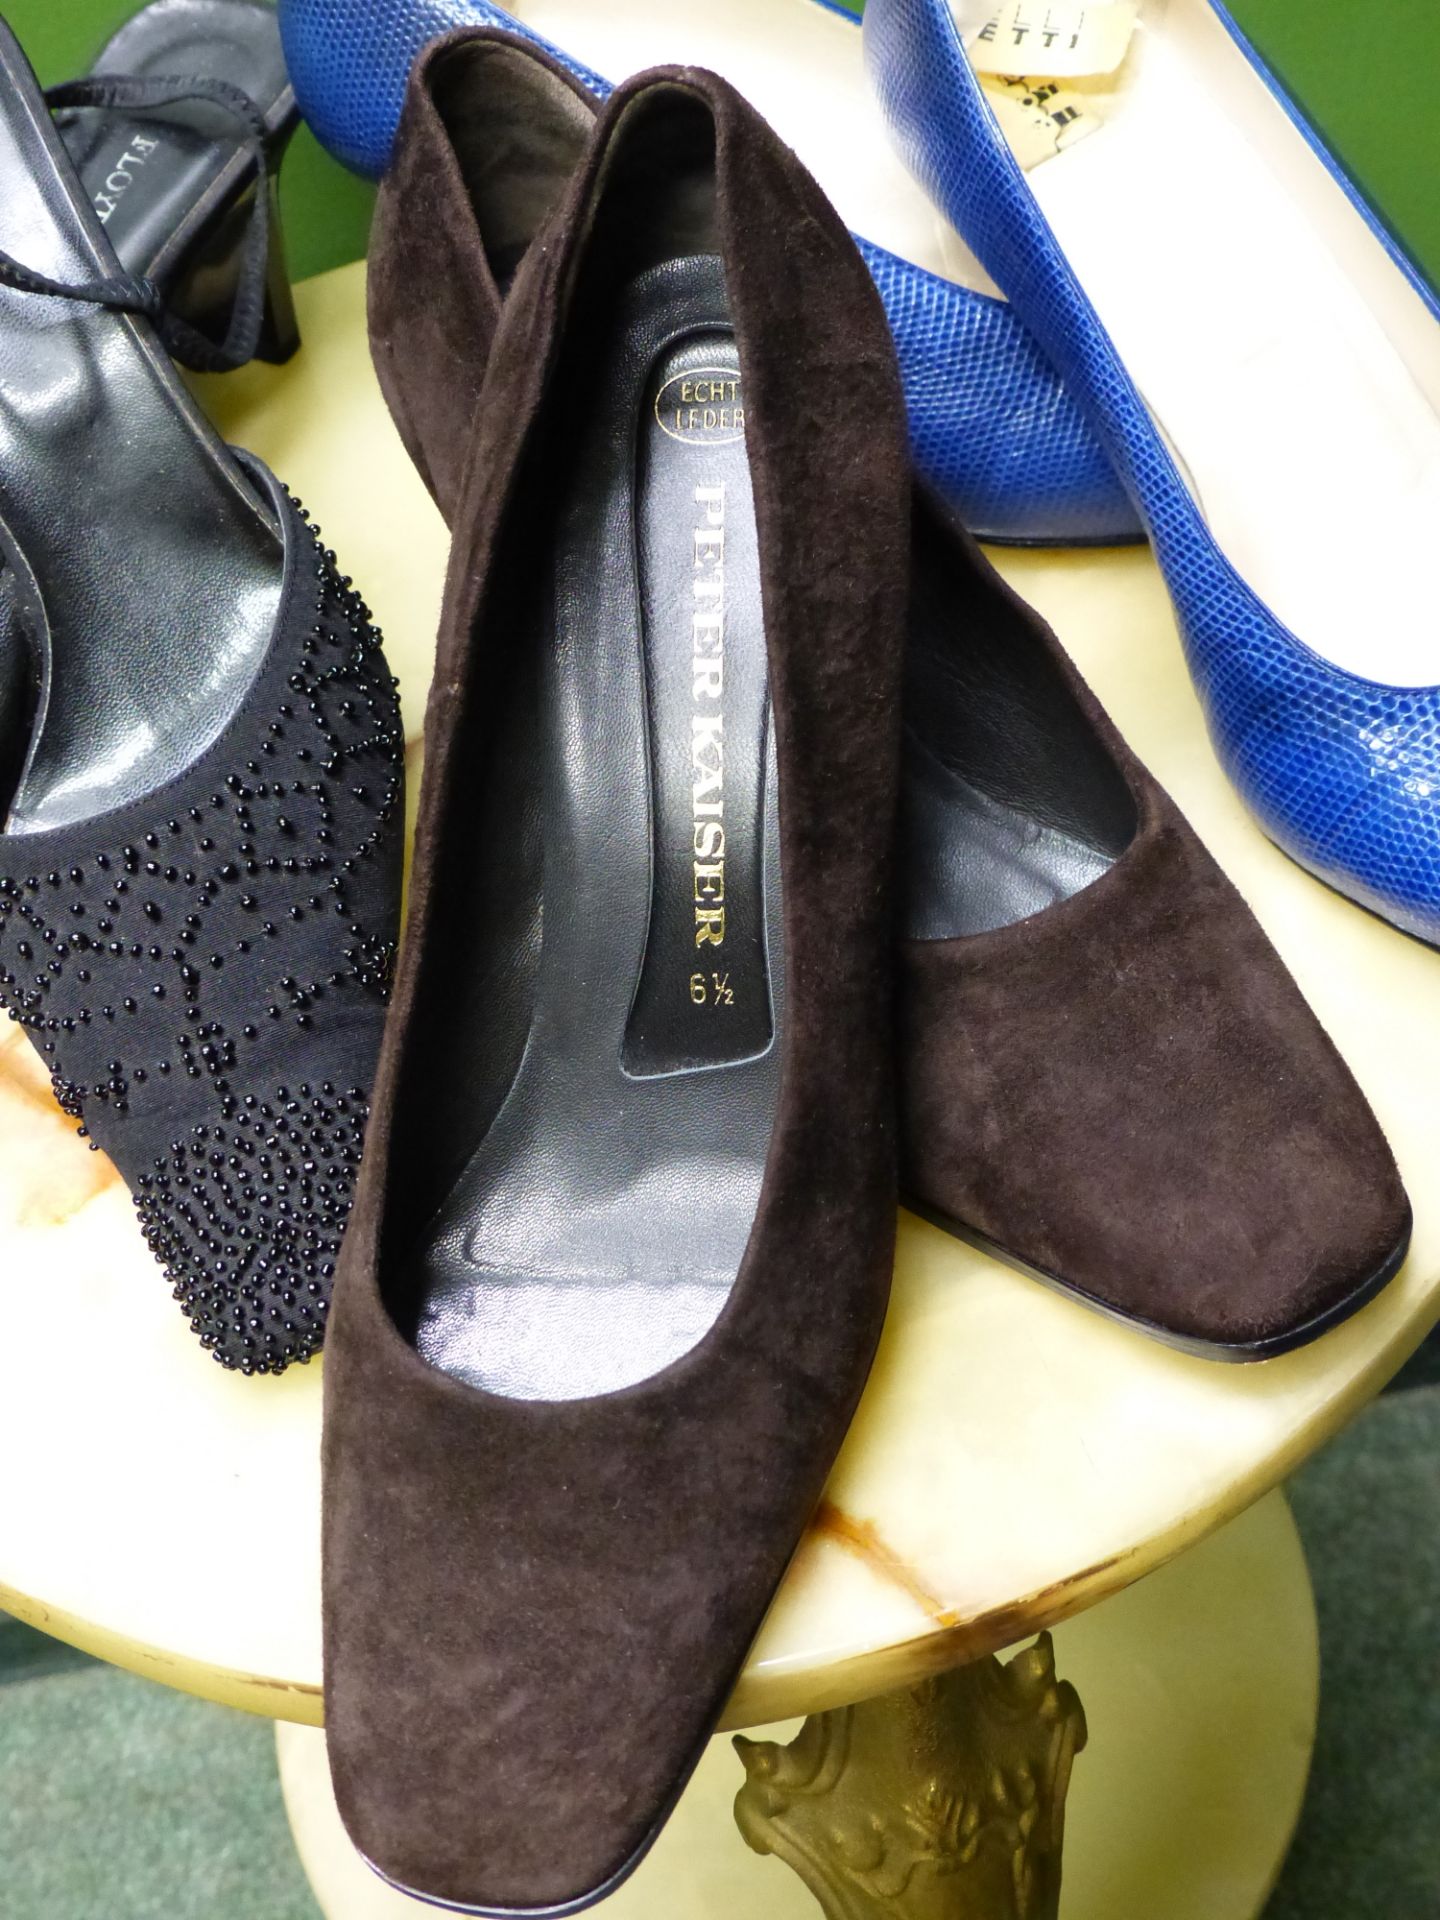 SHOES. FRATELL ROSSETTI BLUE CROC STYLE EUR SIZE 39.5, TOGETHER WITH PETER KAISER CAFE SUEDE UK SIZE - Image 2 of 12